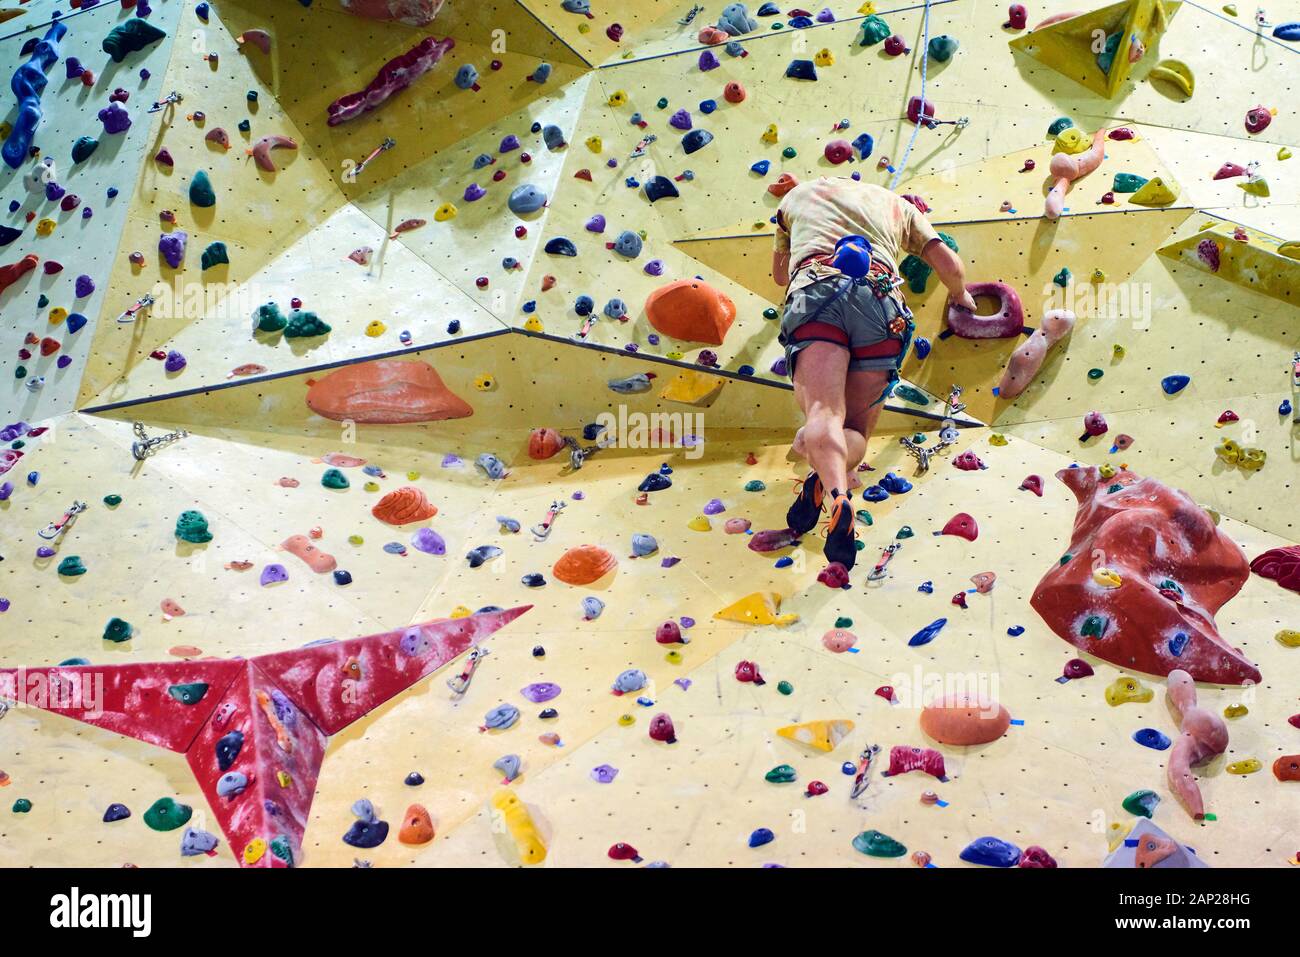 Man climbing wall in bouldering gym. Detail on legs and equipment Stock Photo